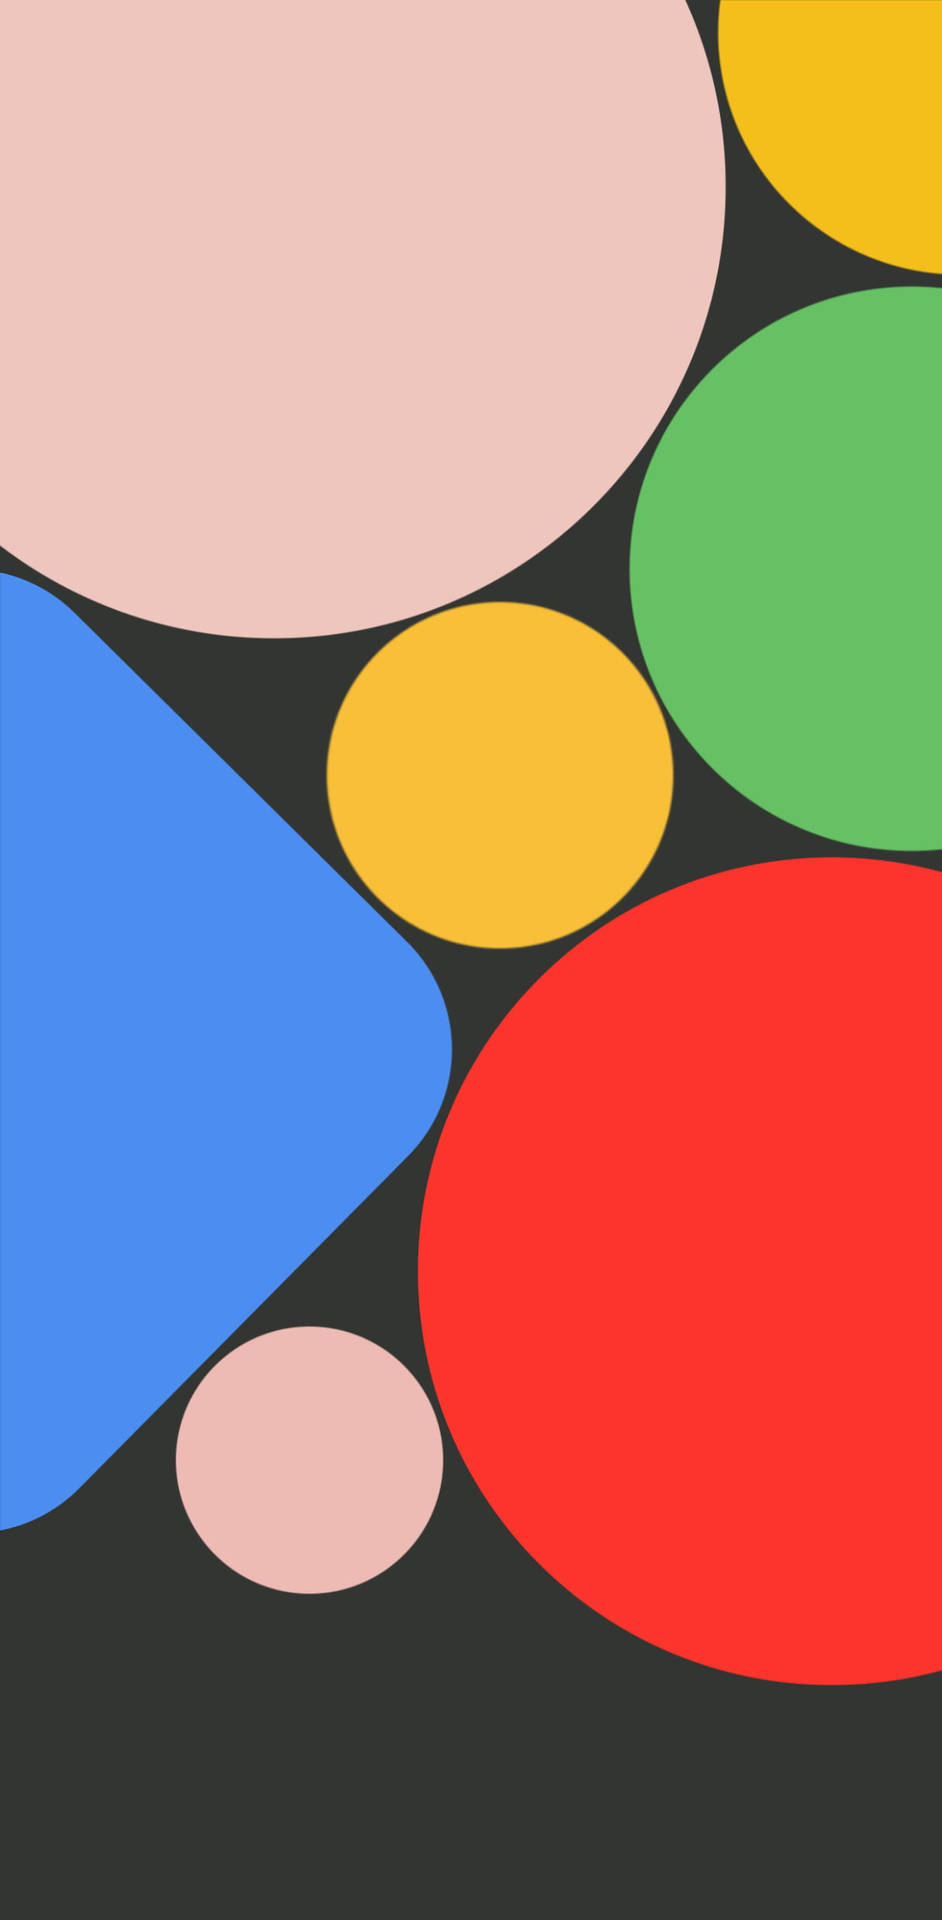 Download Colorful Shapes Google Pixel 4 Background Wallpaper | Wallpapers .com